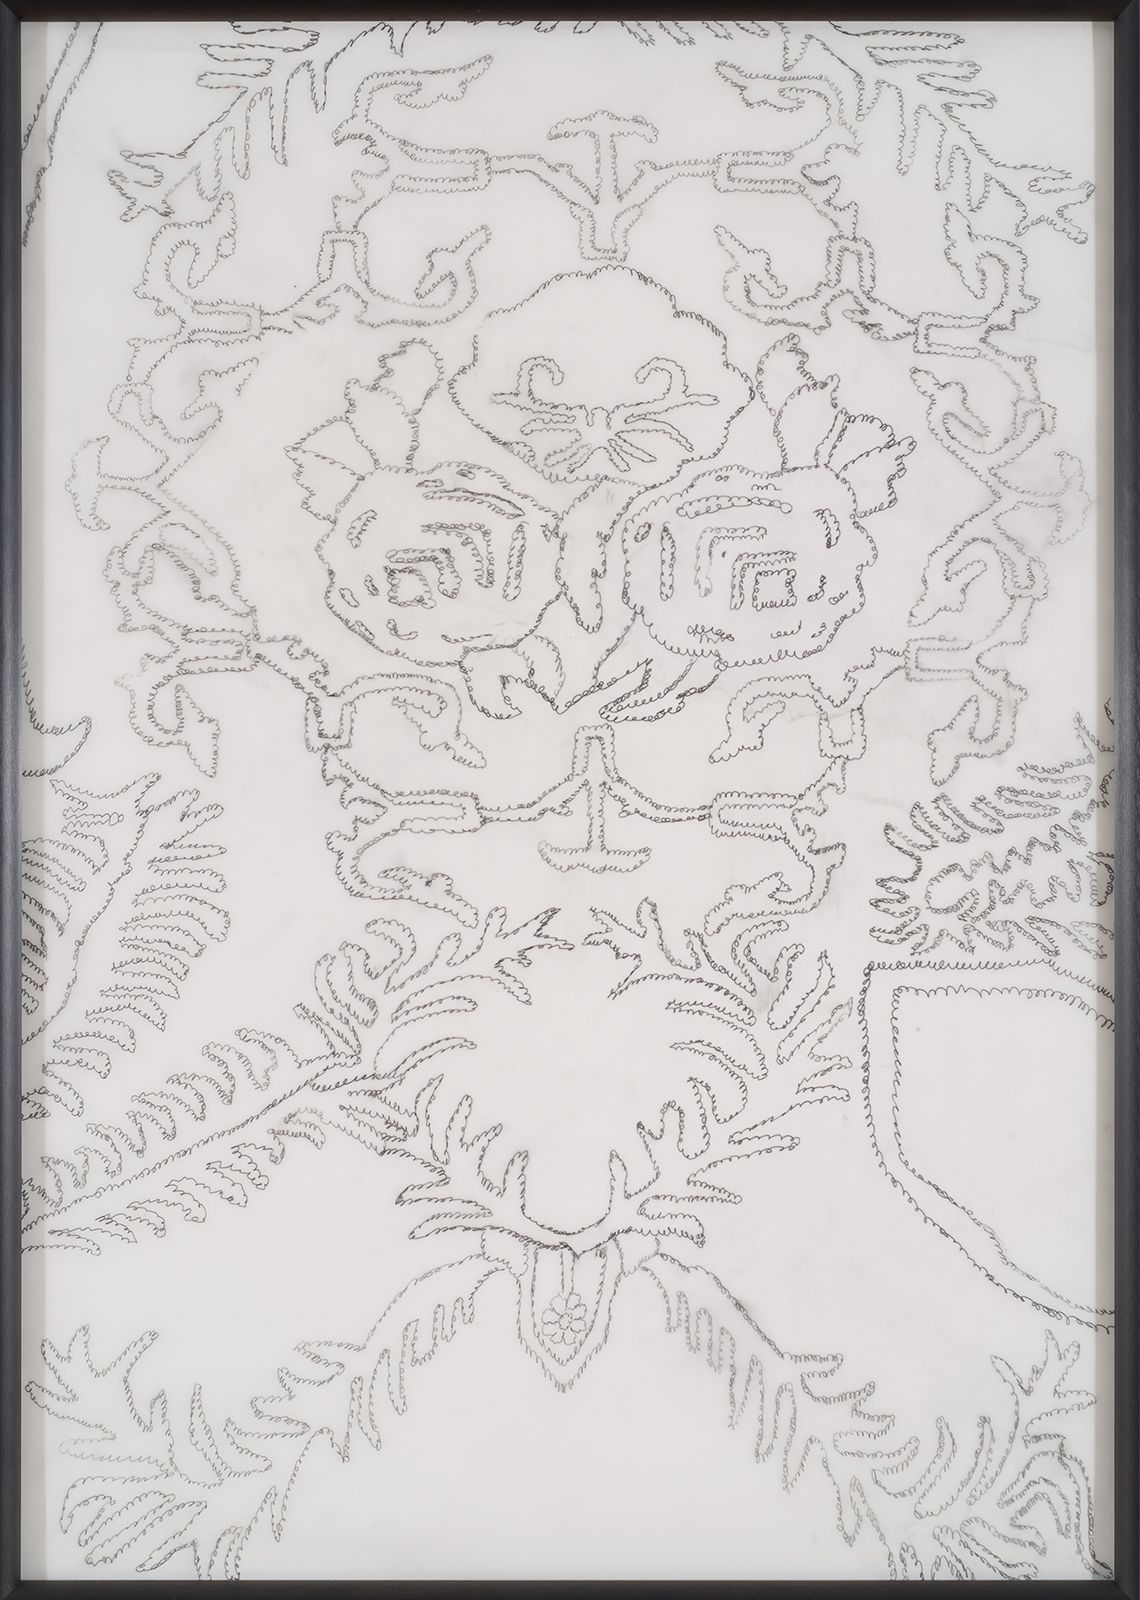 Hany Armanious, Magic Carpet, 2002, pencil on tracing paper, 33 x 23.5 in.